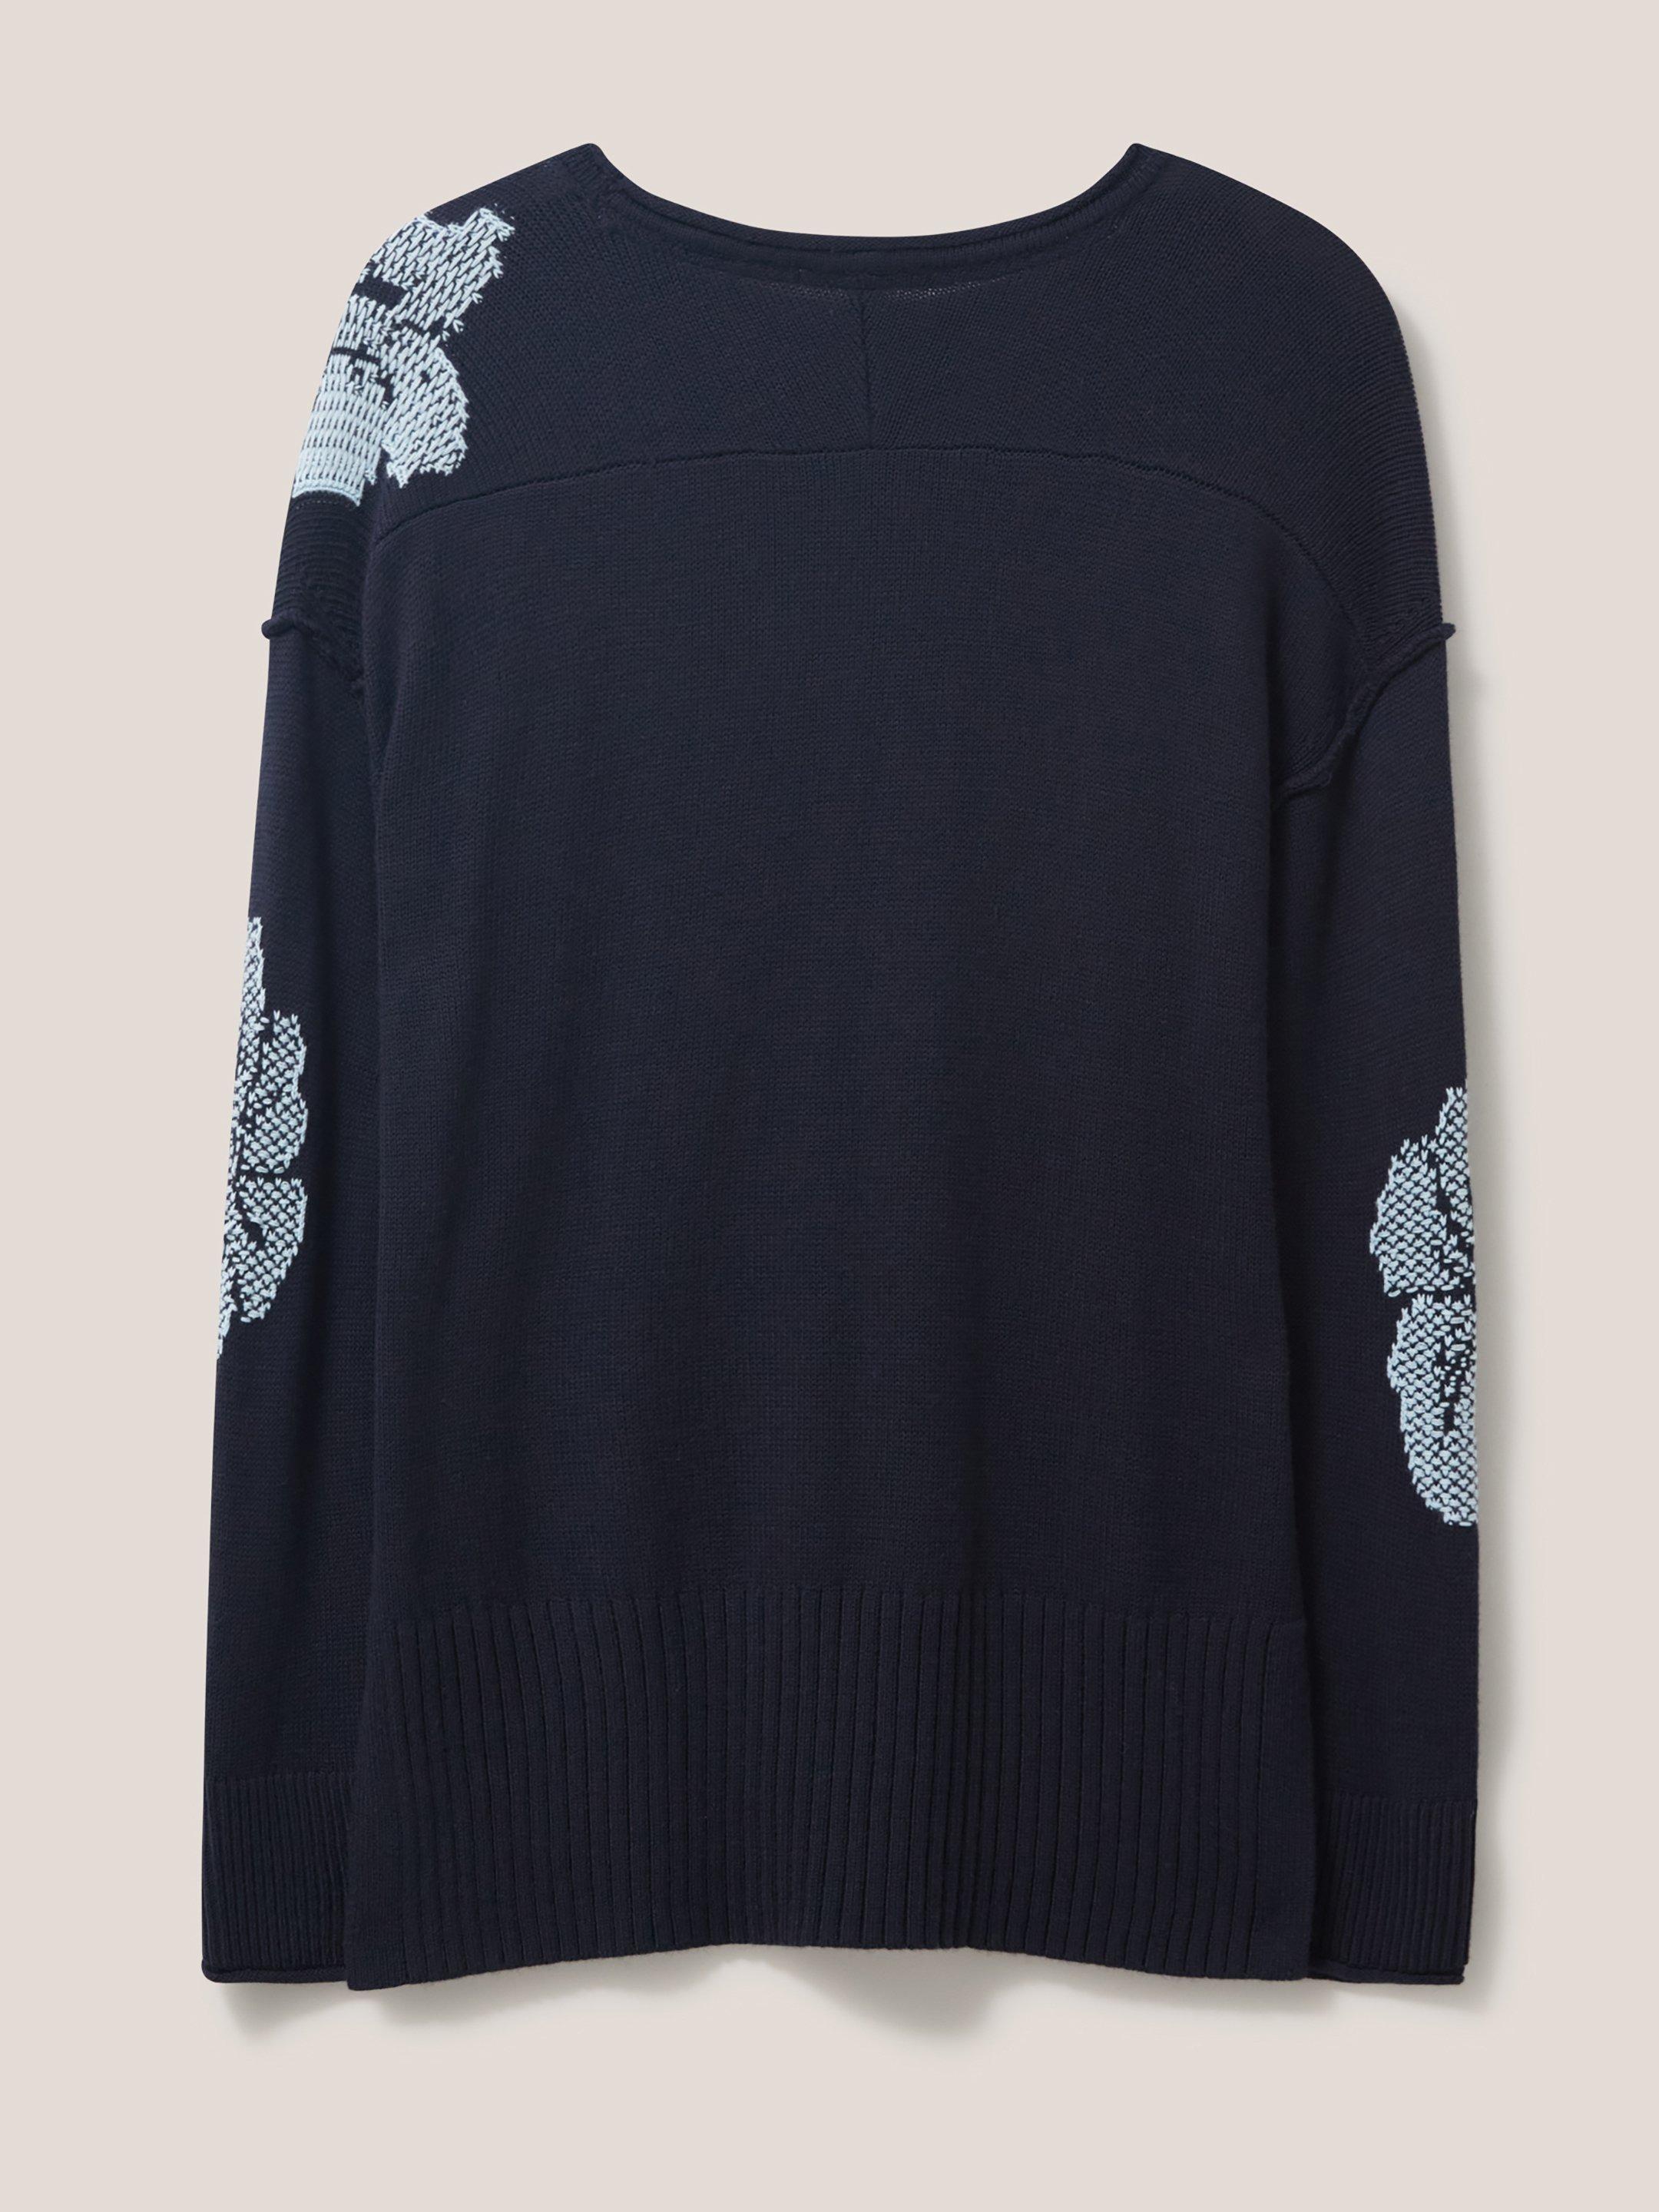 Blossoming Woodland Jumper in NAVY MULTI - FLAT BACK